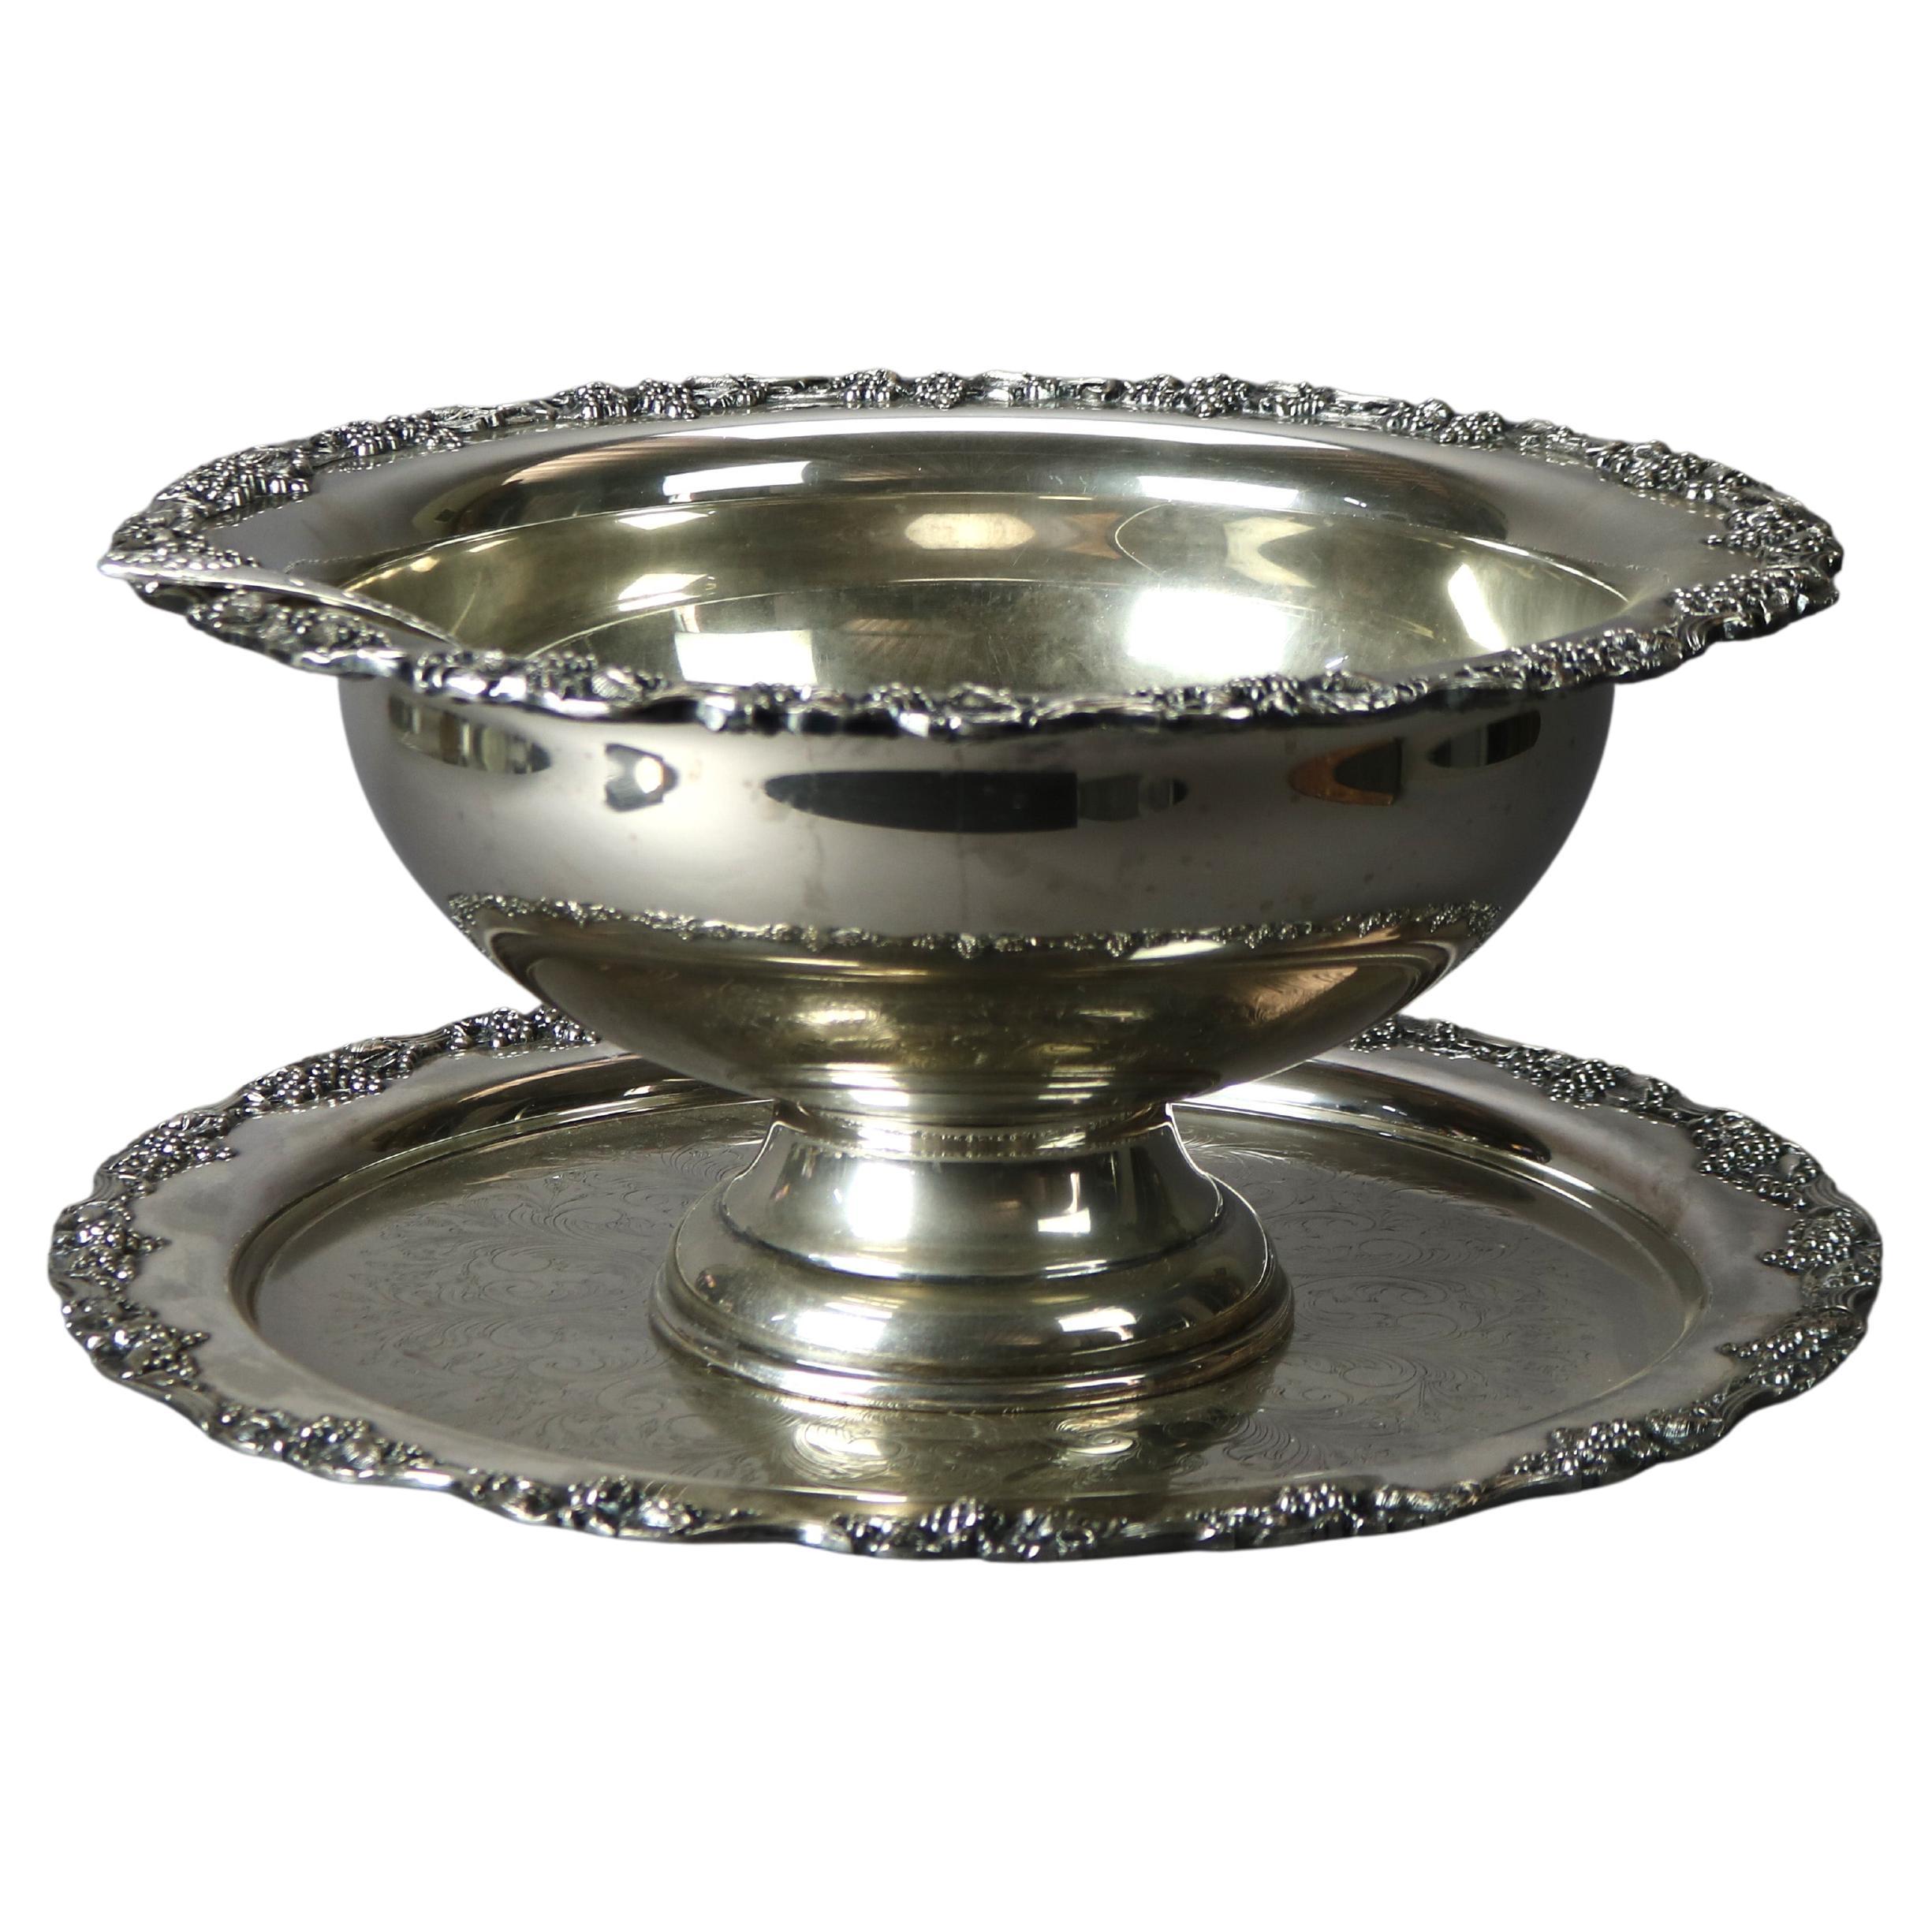 Silver Plate 3-Piece Punch Bowl Set by Sheriden Taunton Silversmith